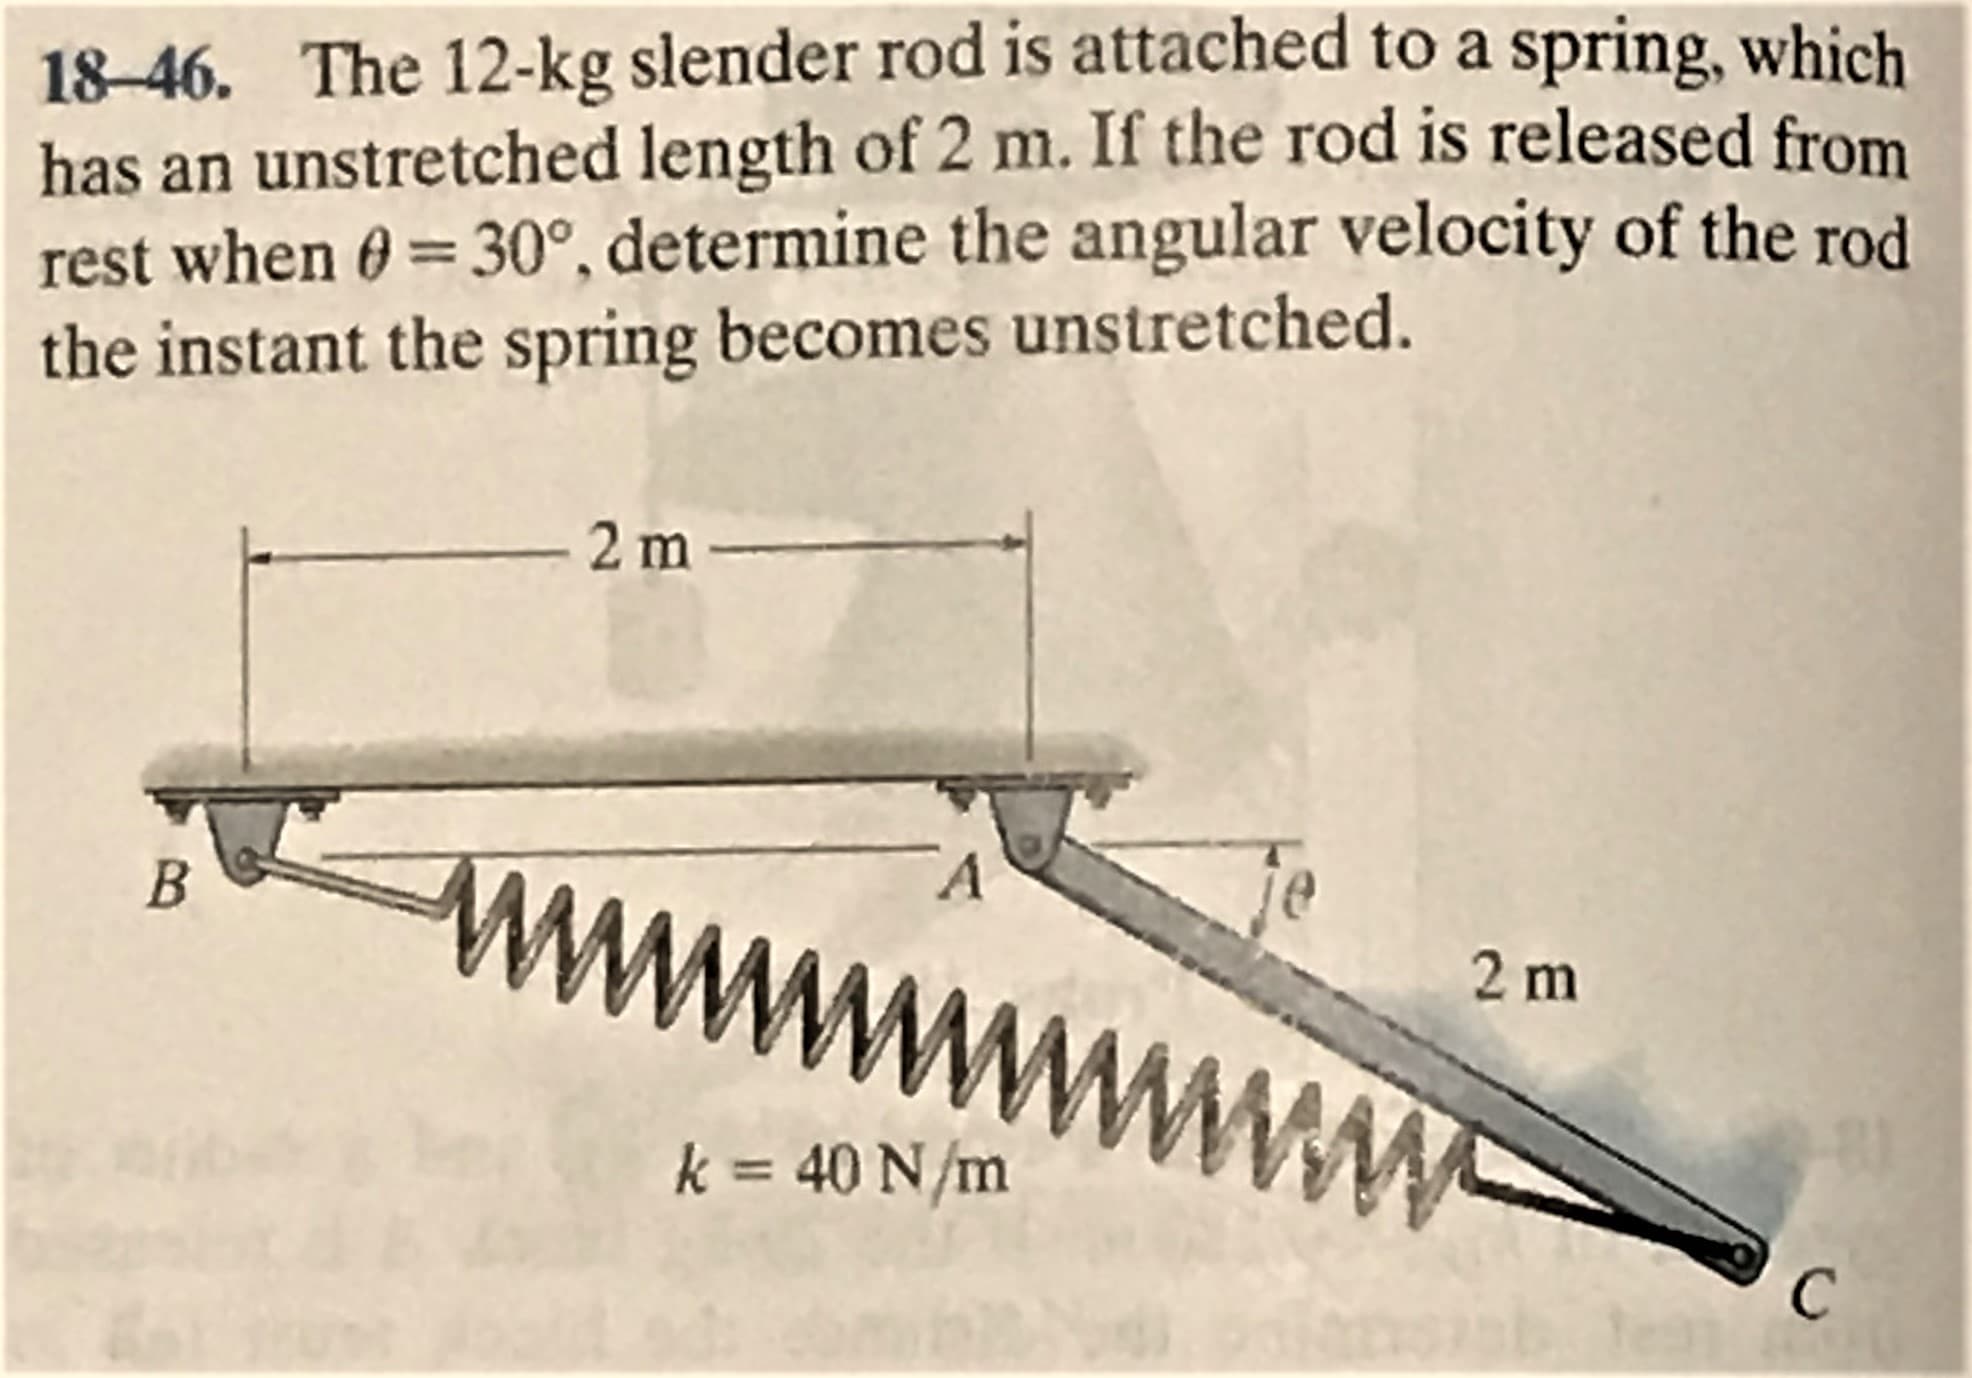 18-46. The 12-kg slender rod is attached to a spring, which
has an unstretched length of 2 m. If the rod is released from
rest when 0=30°, determine the angular velocity of the rod
the instant the spring becomes unstretched.
%3D
2 m
2 m
k = 40 N/m
www W
